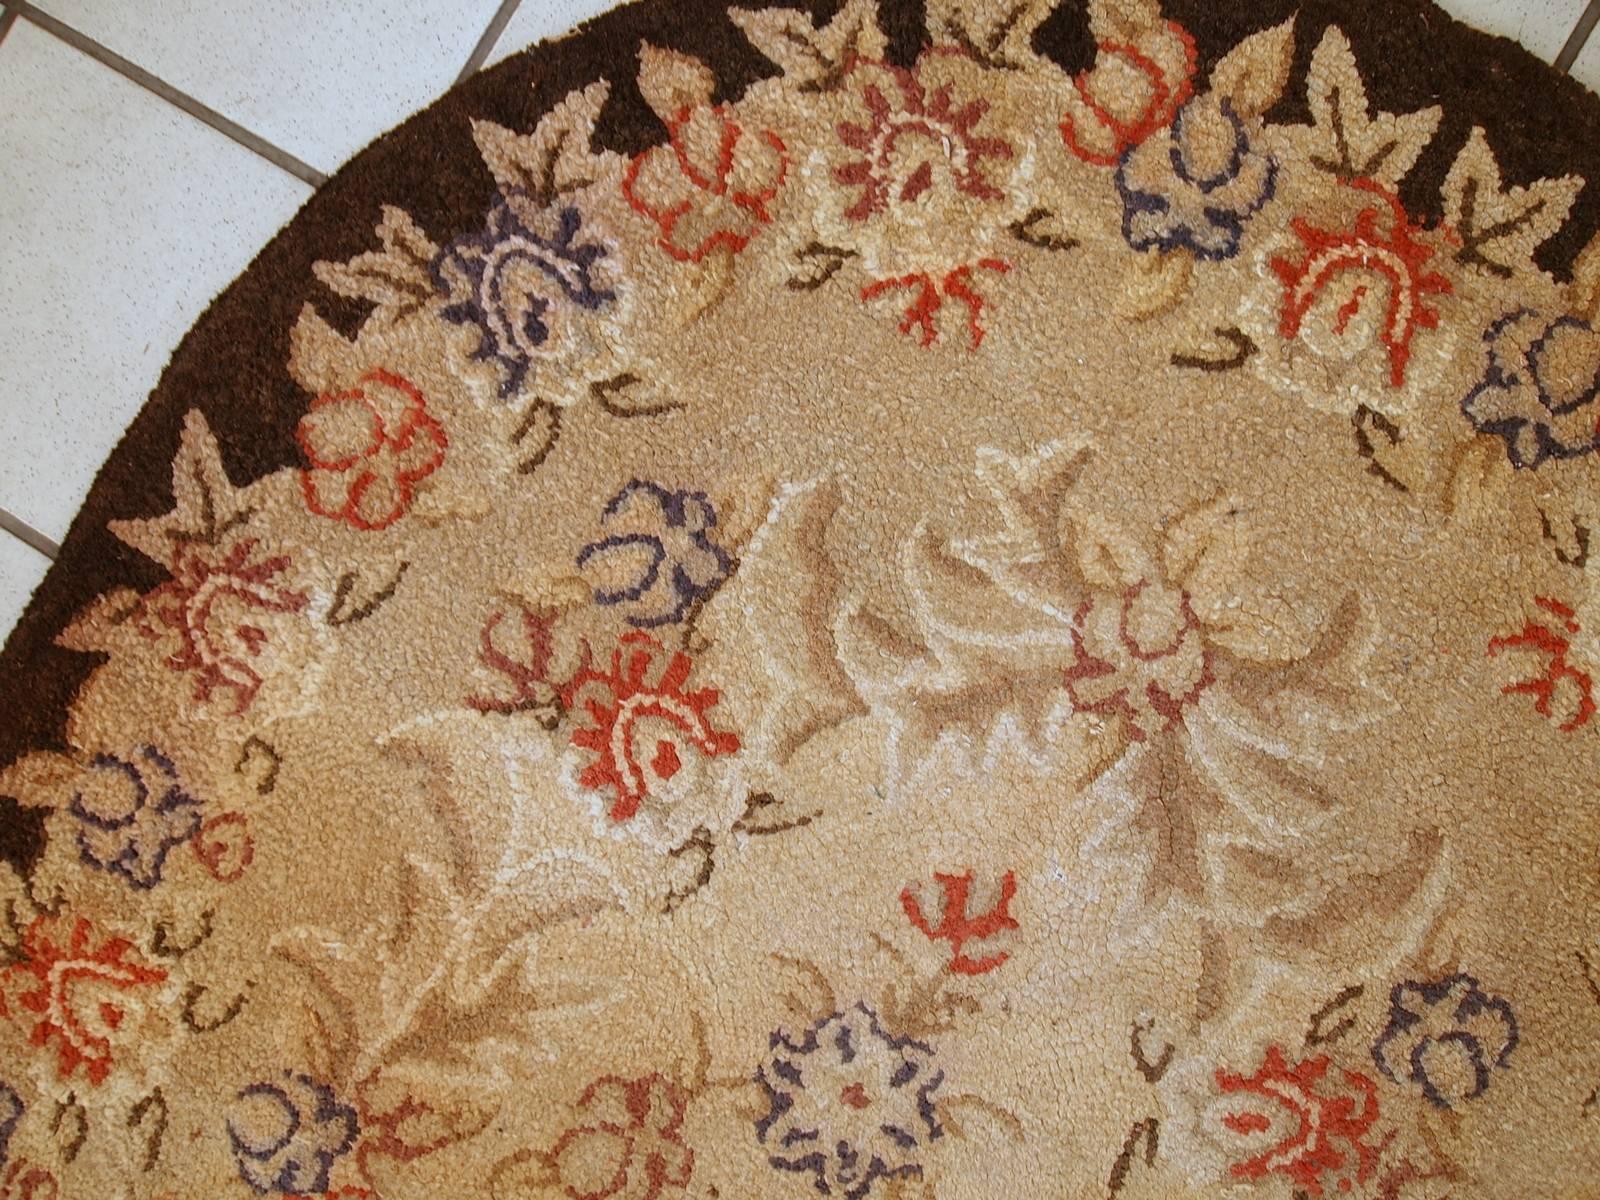 Handmade antique American hooked rug in original condition. The rug is in light pastel shades of brown, beige and red. The rug is in beautiful floral design and has oval shape. The condition is original and good.